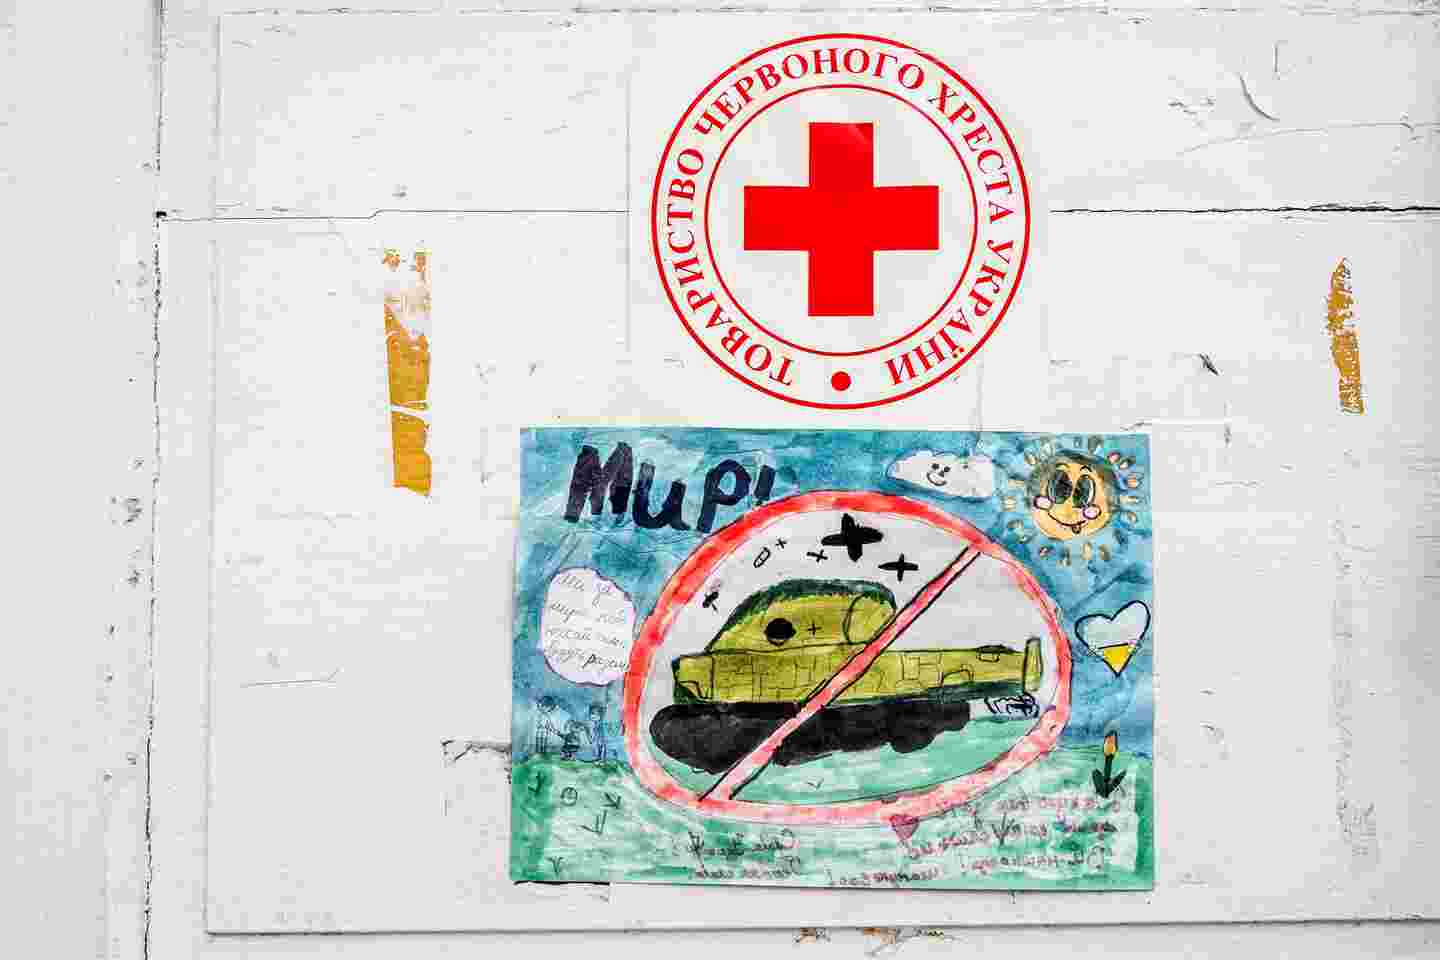 A child’s drawing of a tank. There is a Red Cross logo above the tank.